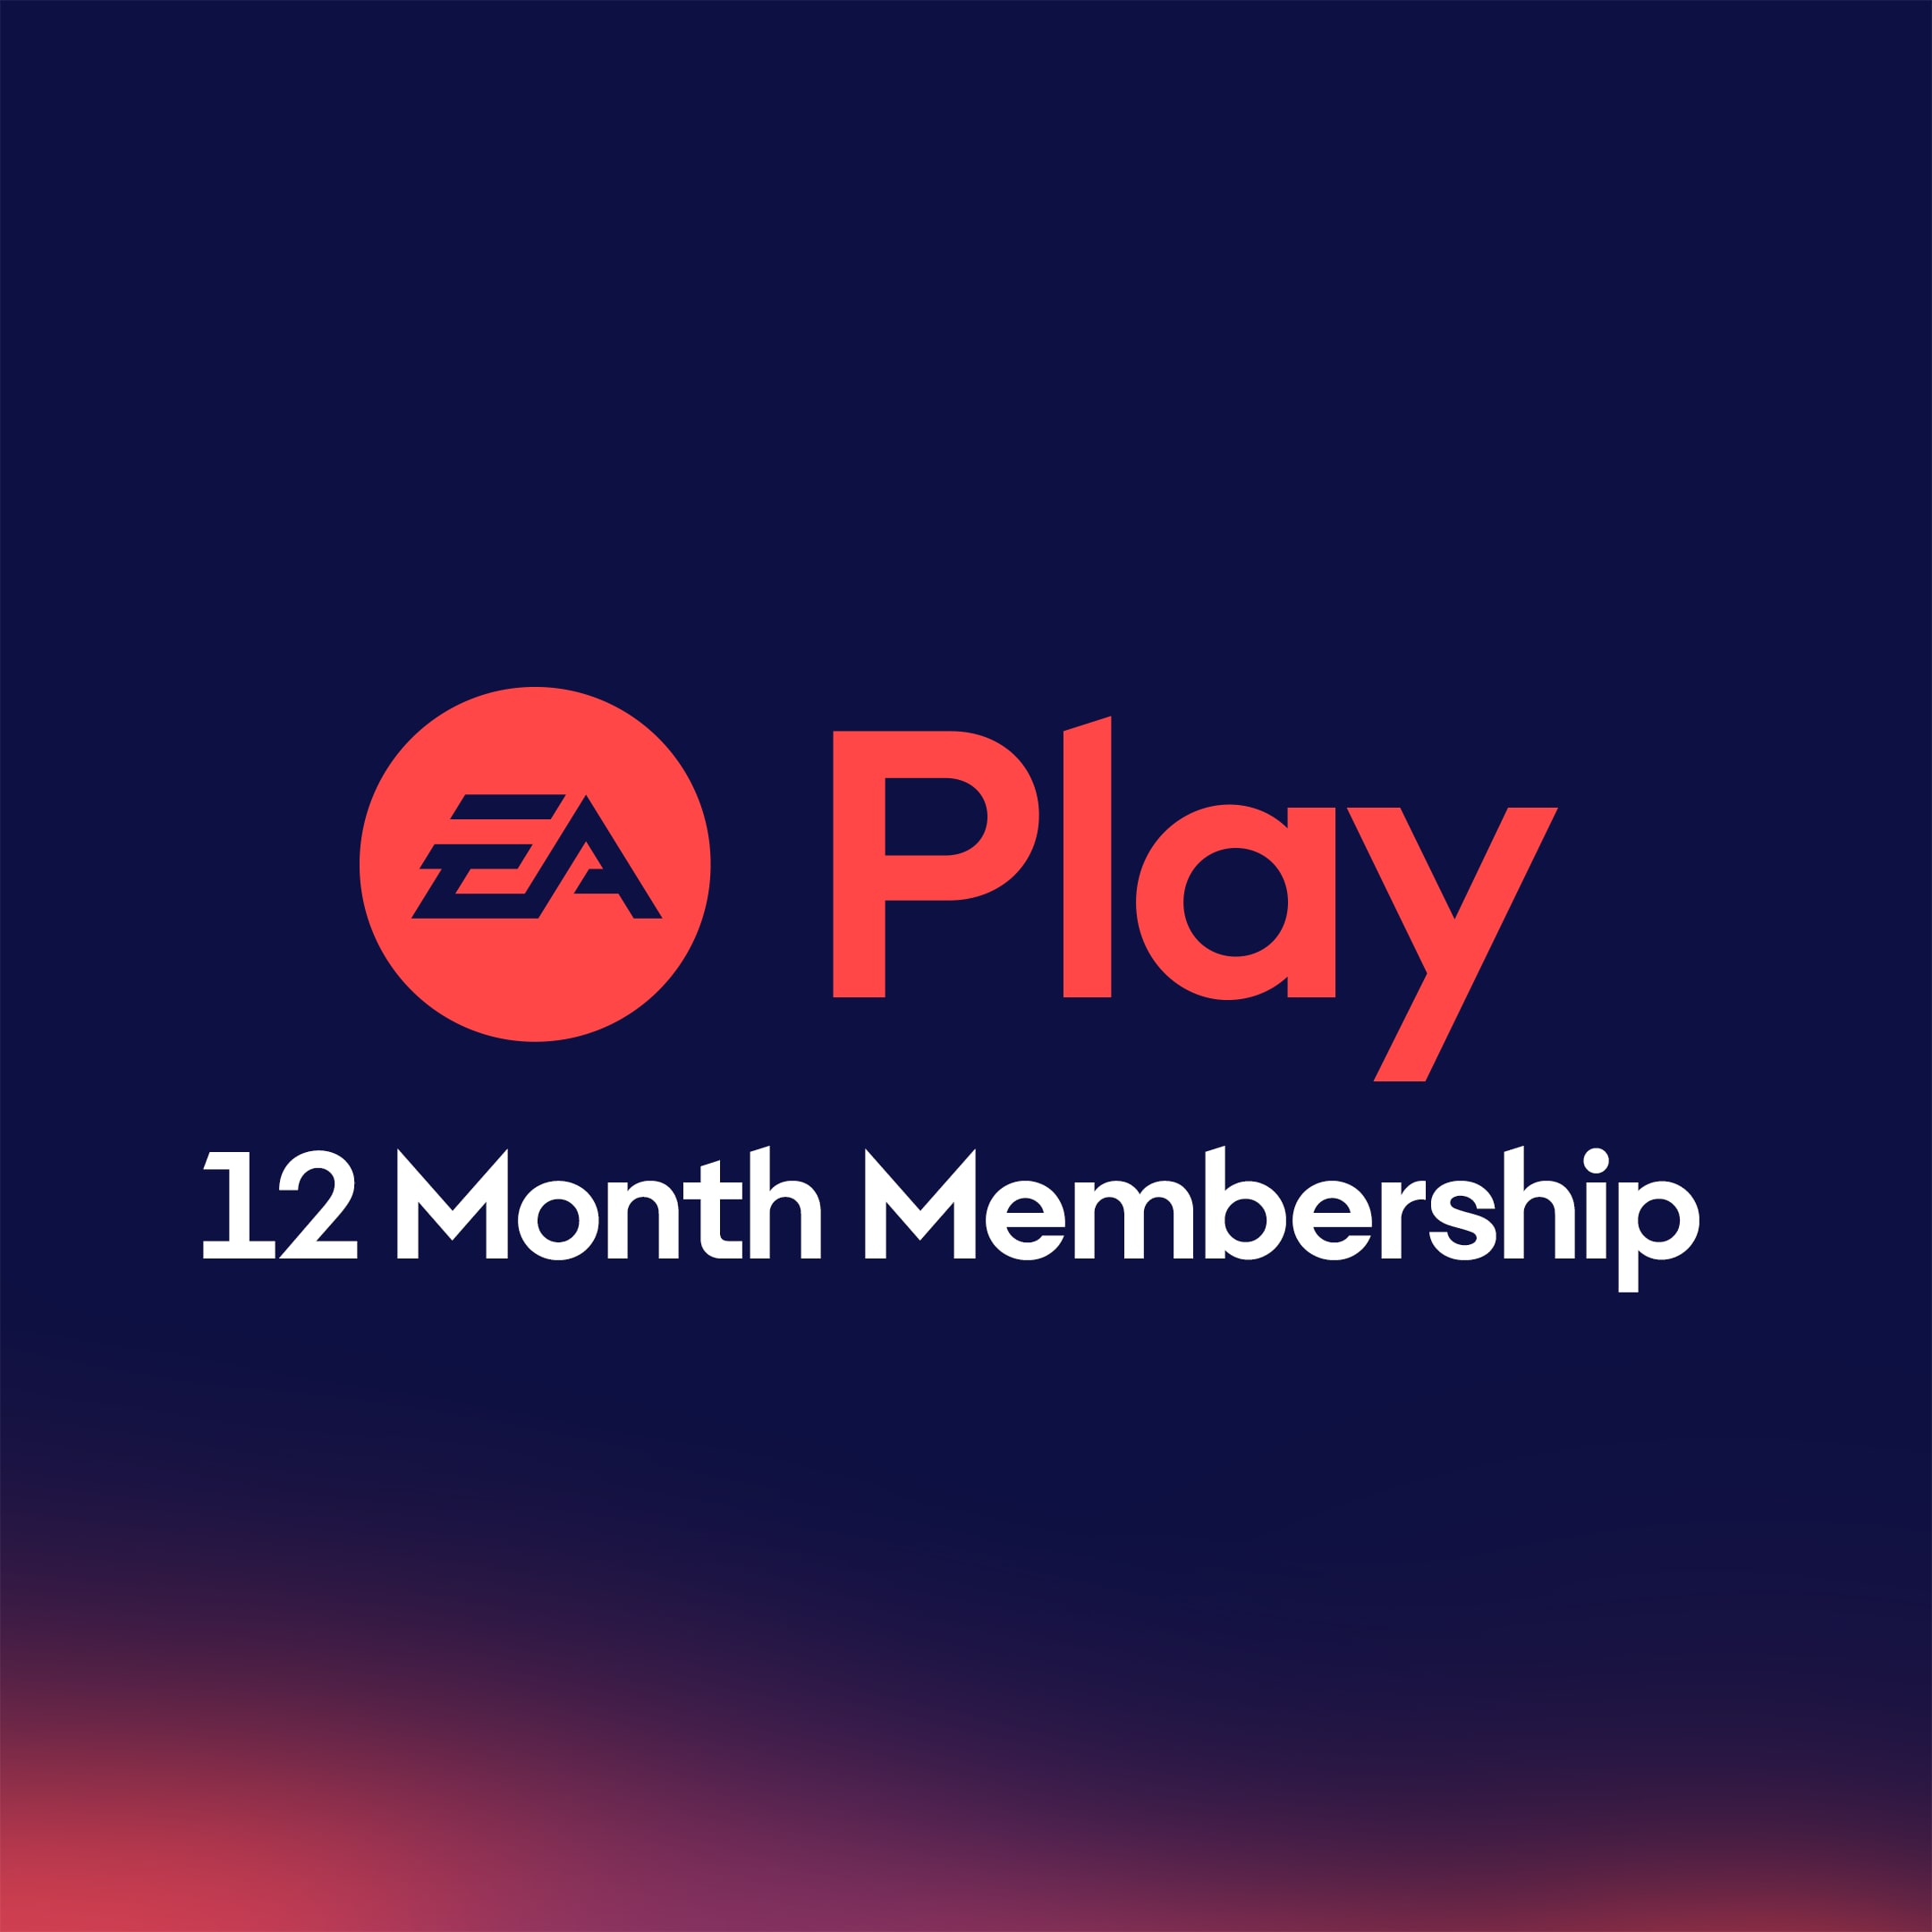 ea access 12 month code free